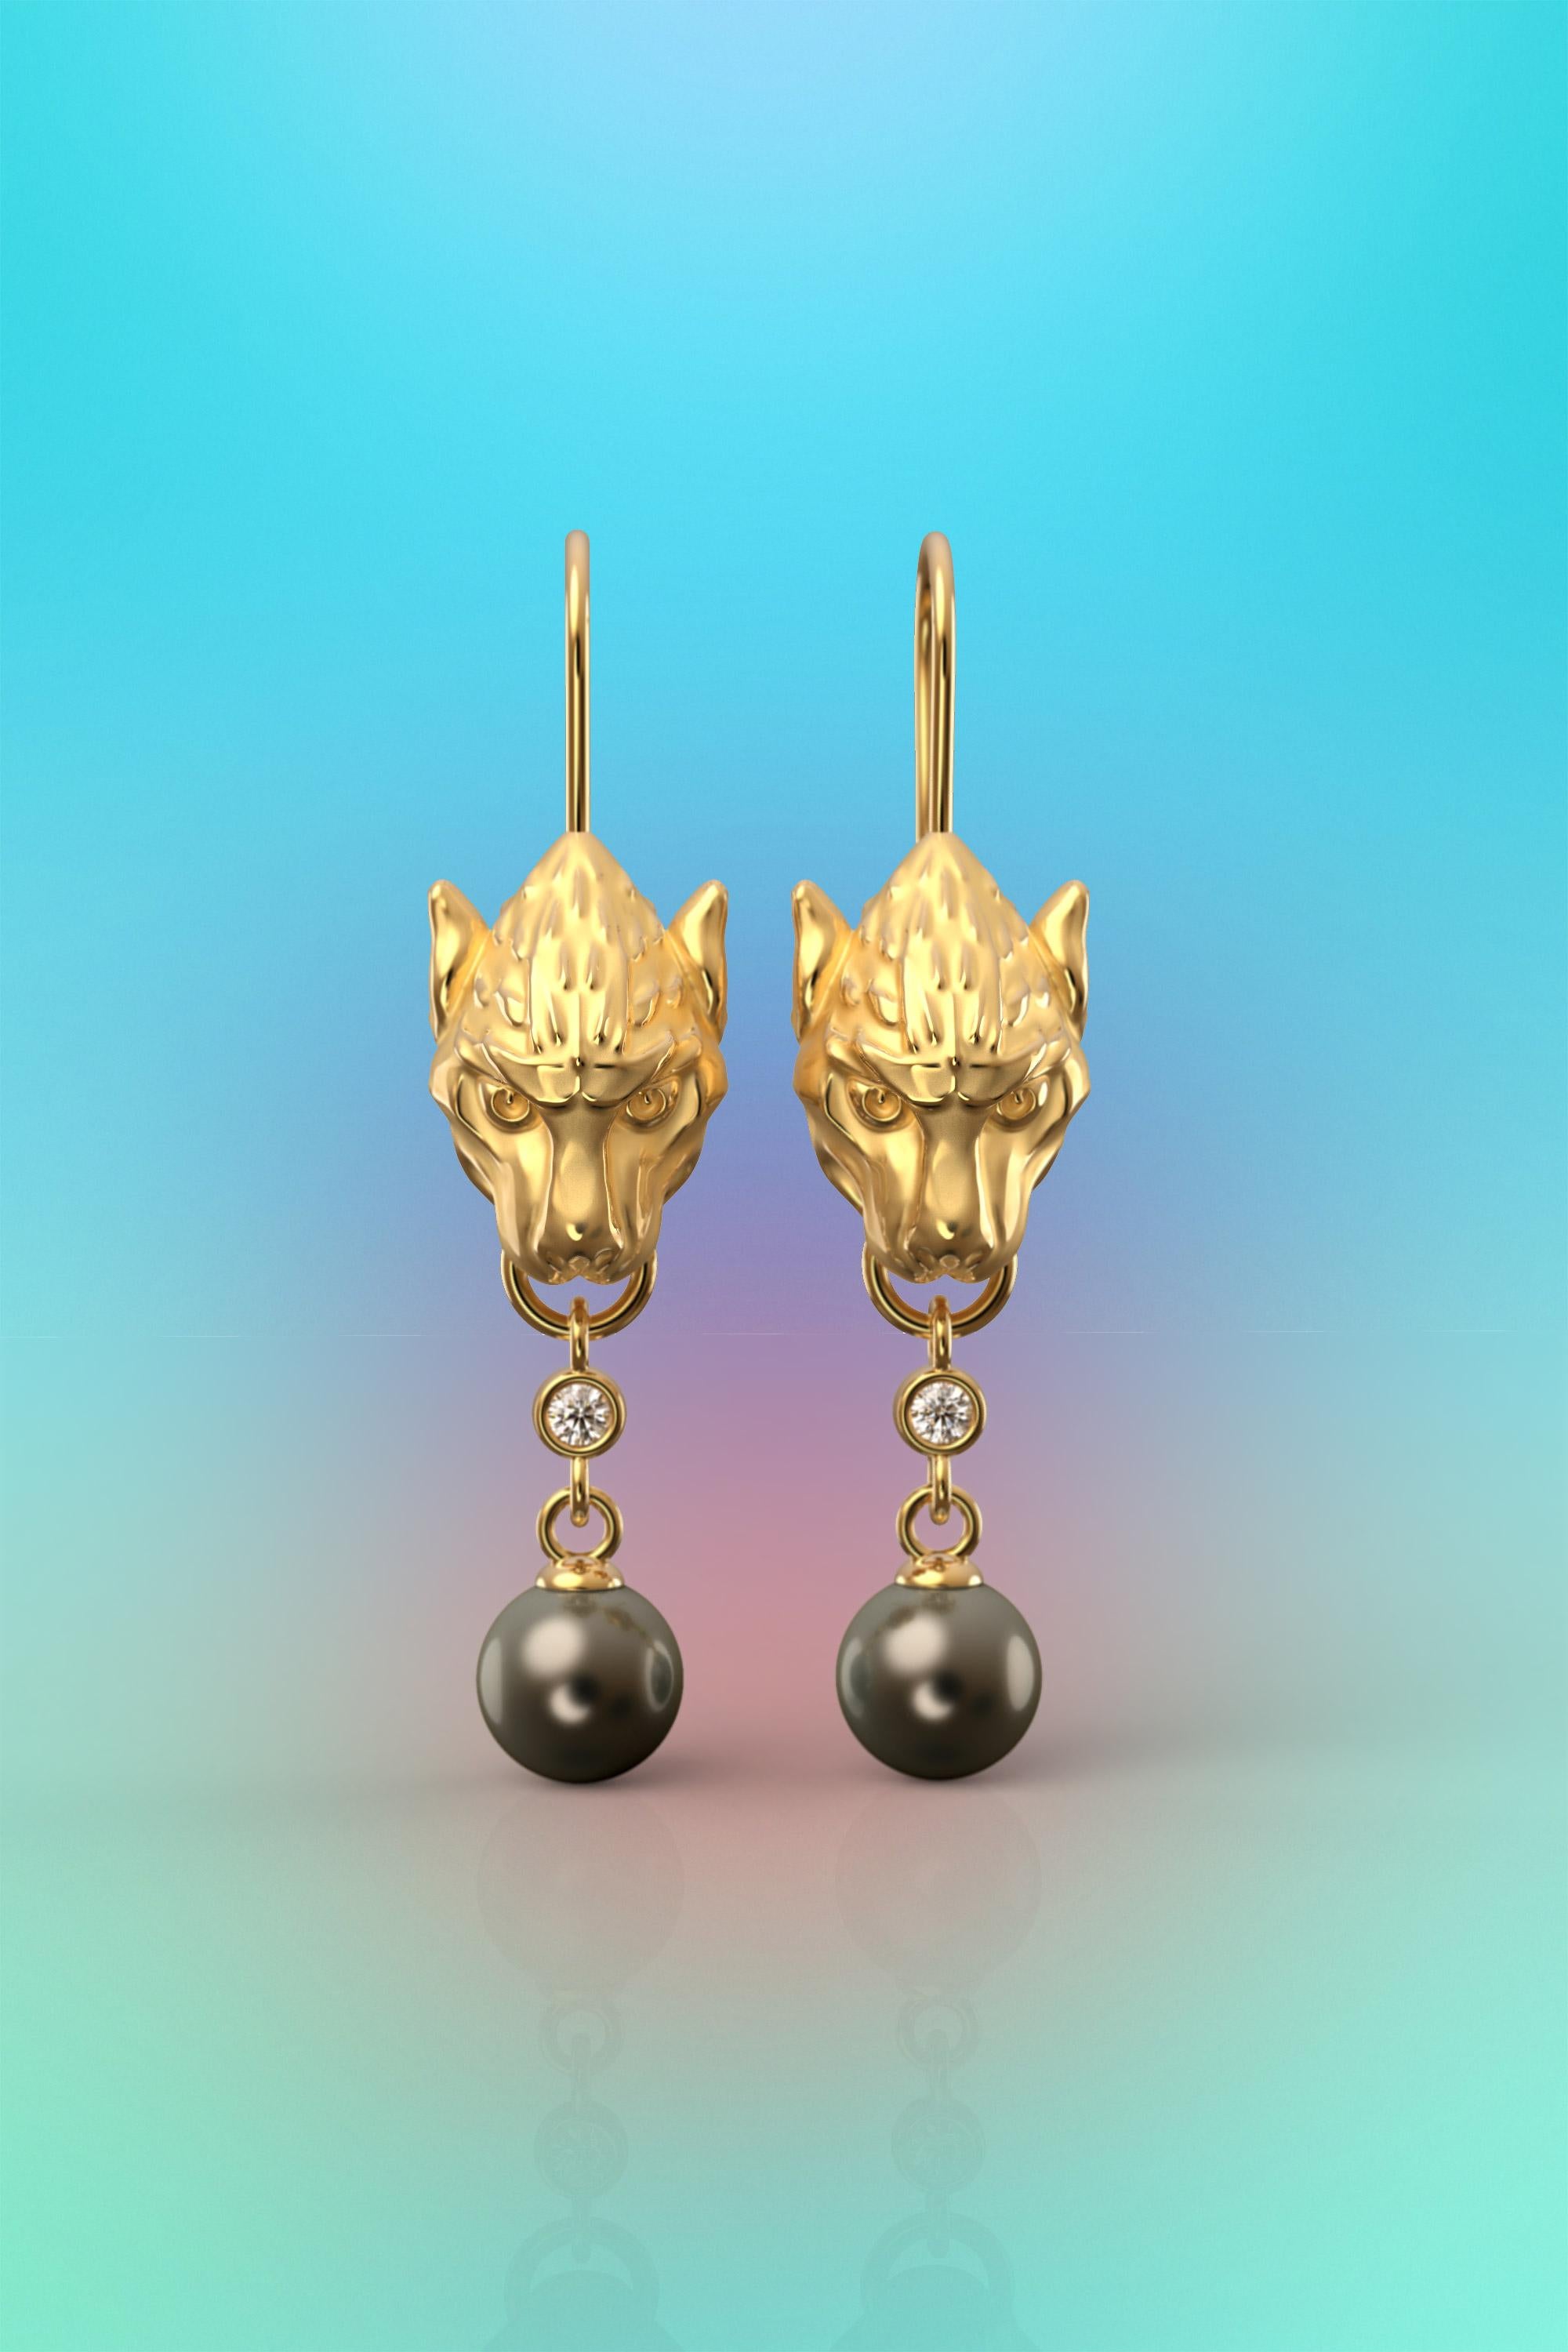 Made to order Sculptural earrings in genuine gold 14k and natural Tahitian Pearls and natural diamonds.
Introducing our exquisite Gothic Gargoyle-inspired Long Dangle Drop Earrings, where elegance meets dark allure. Crafted with meticulous attention